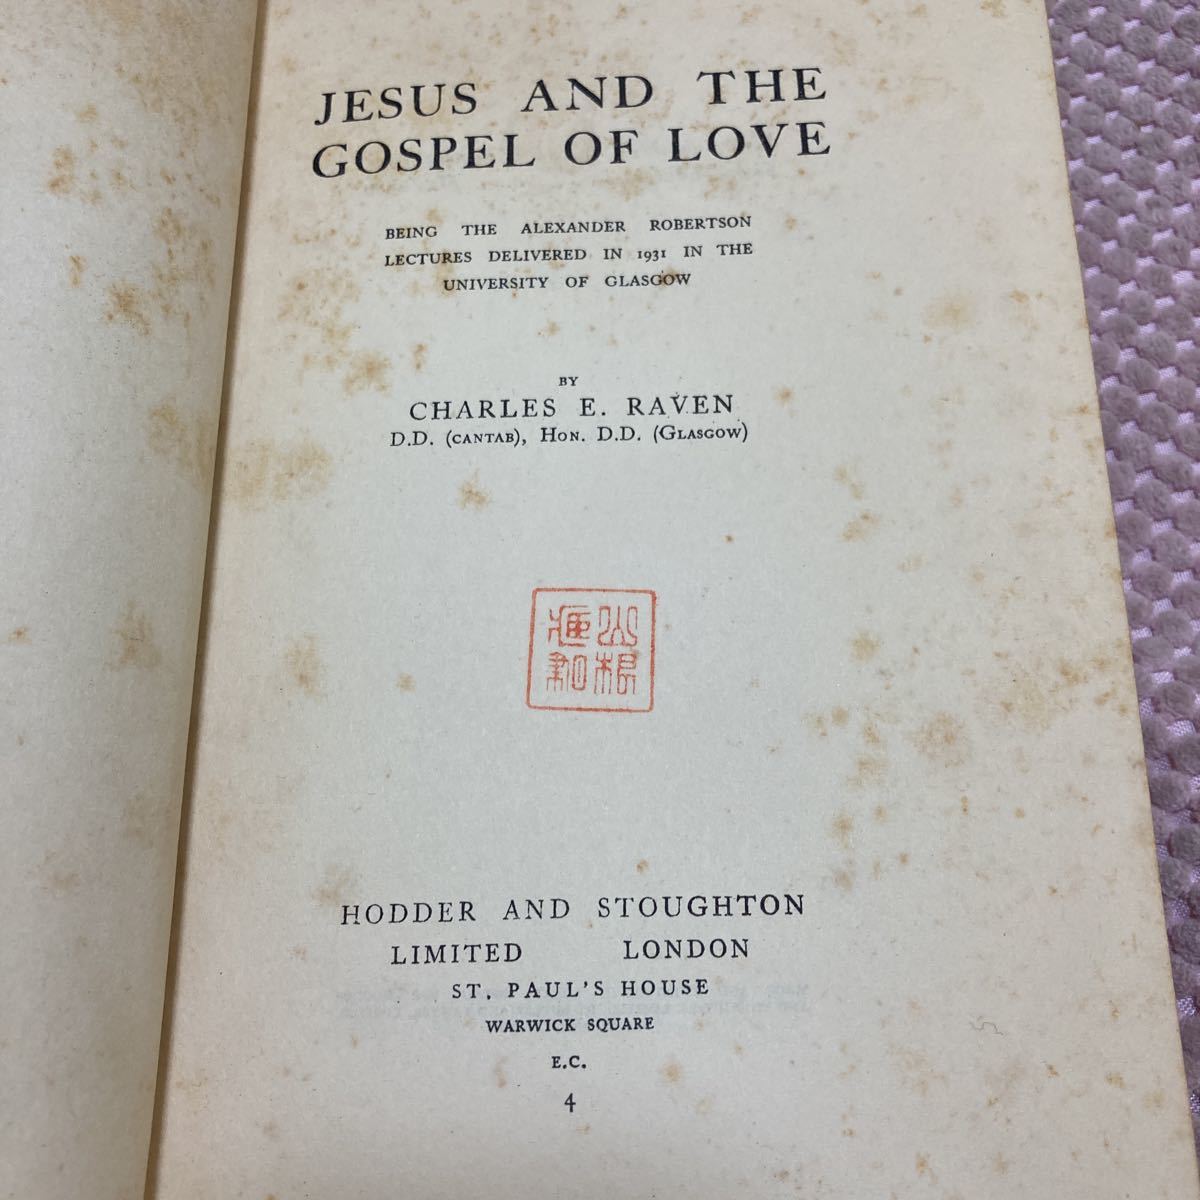 JESUS AND THE GOSPEL OF LOVE　洋書　英語　キリスト教　　ヴィンテージ　1949年_画像3